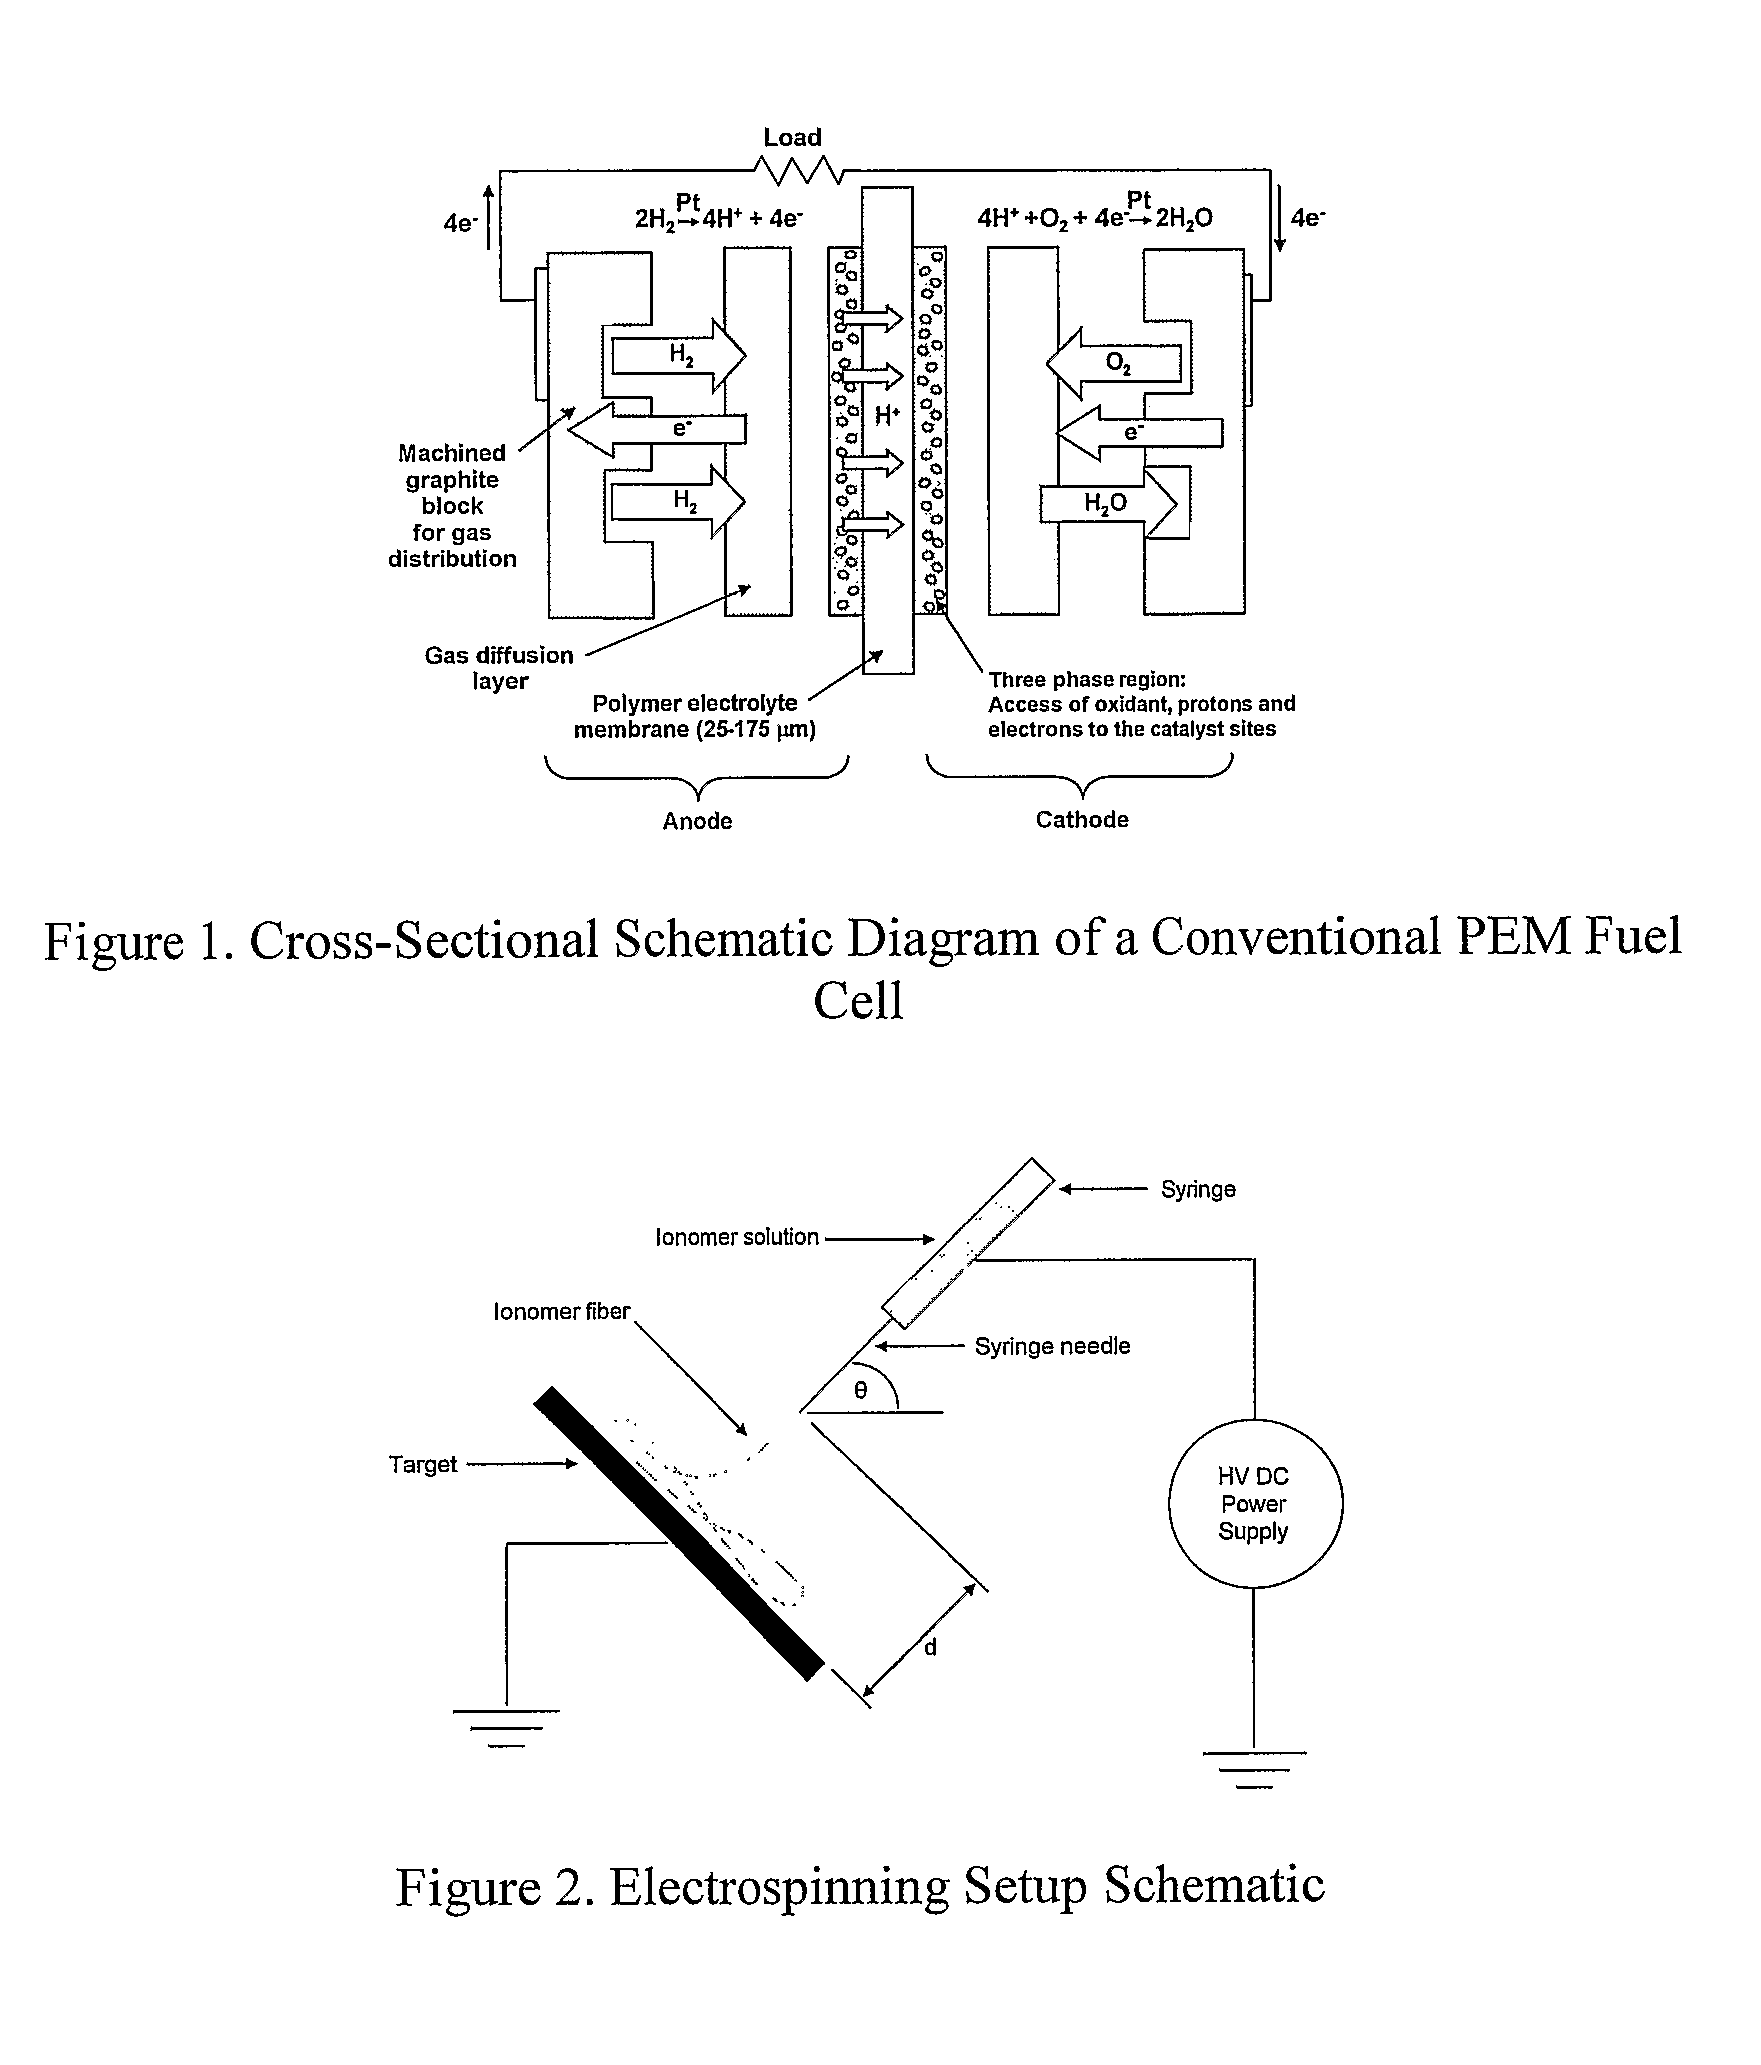 Solution based enhancements of fuel cell components and other electrochemical systems and devices